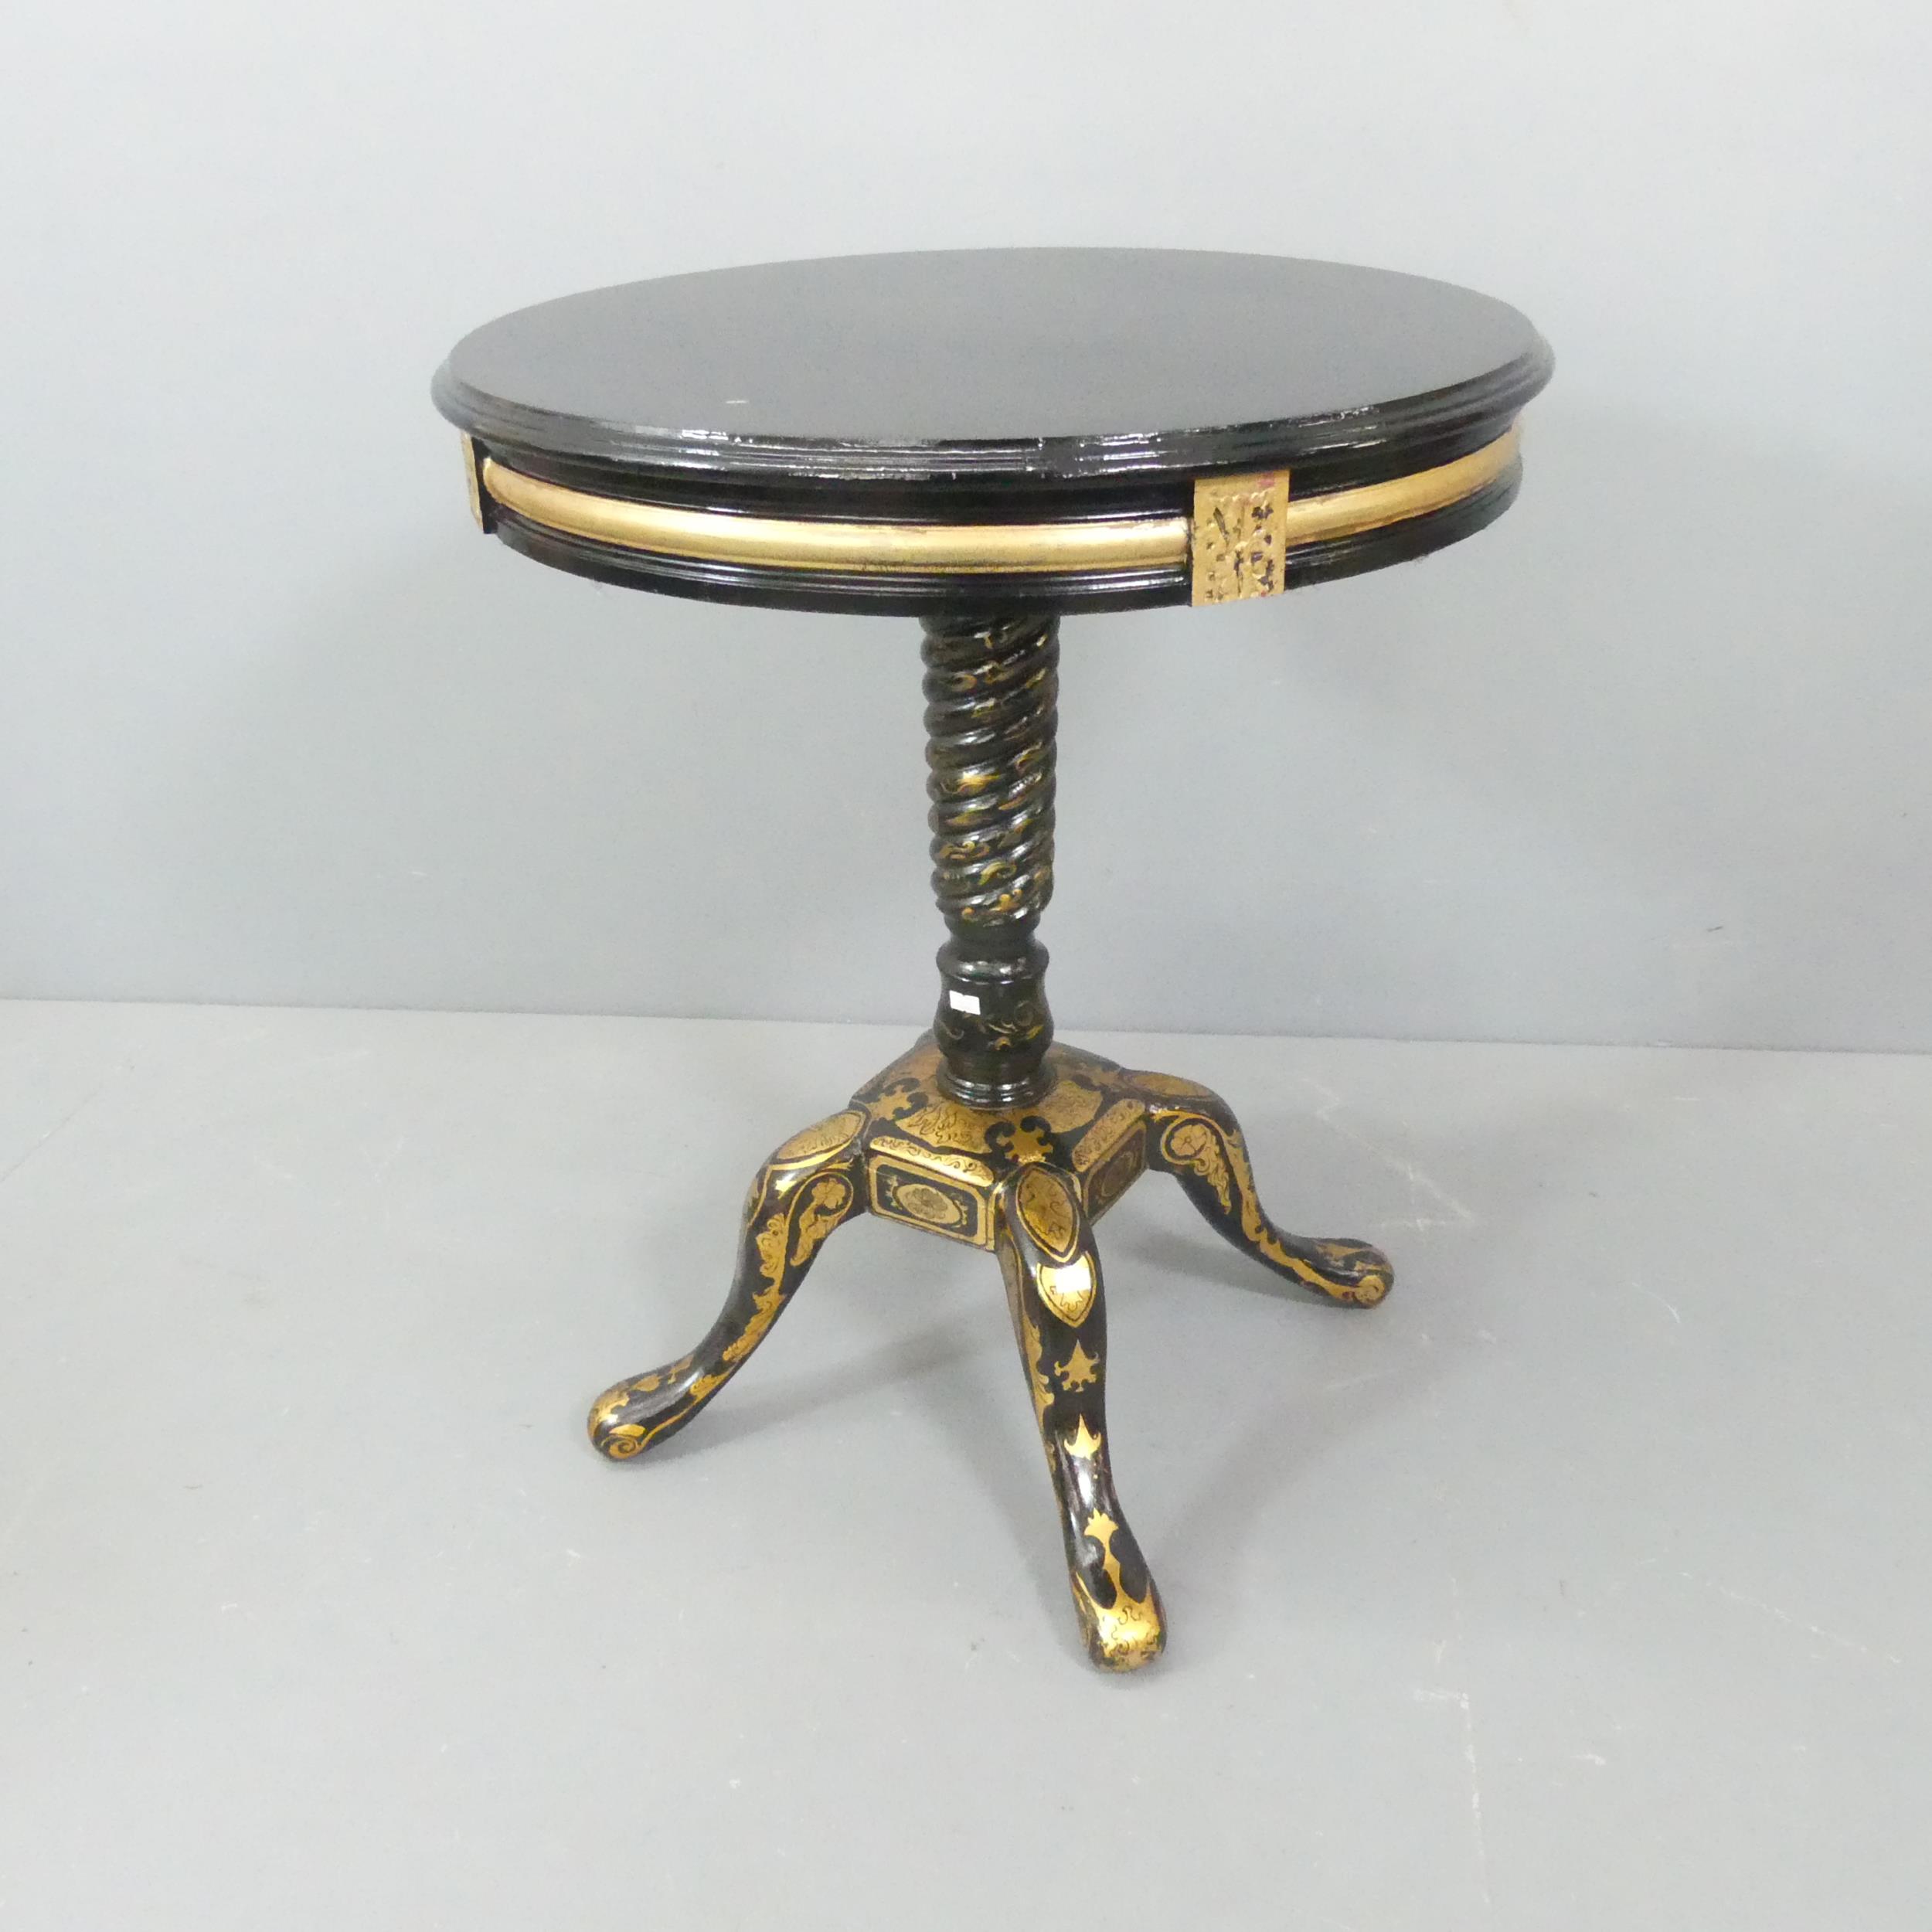 A Continental style ebonised and gilt-painted circular occasional table, with carved and painted